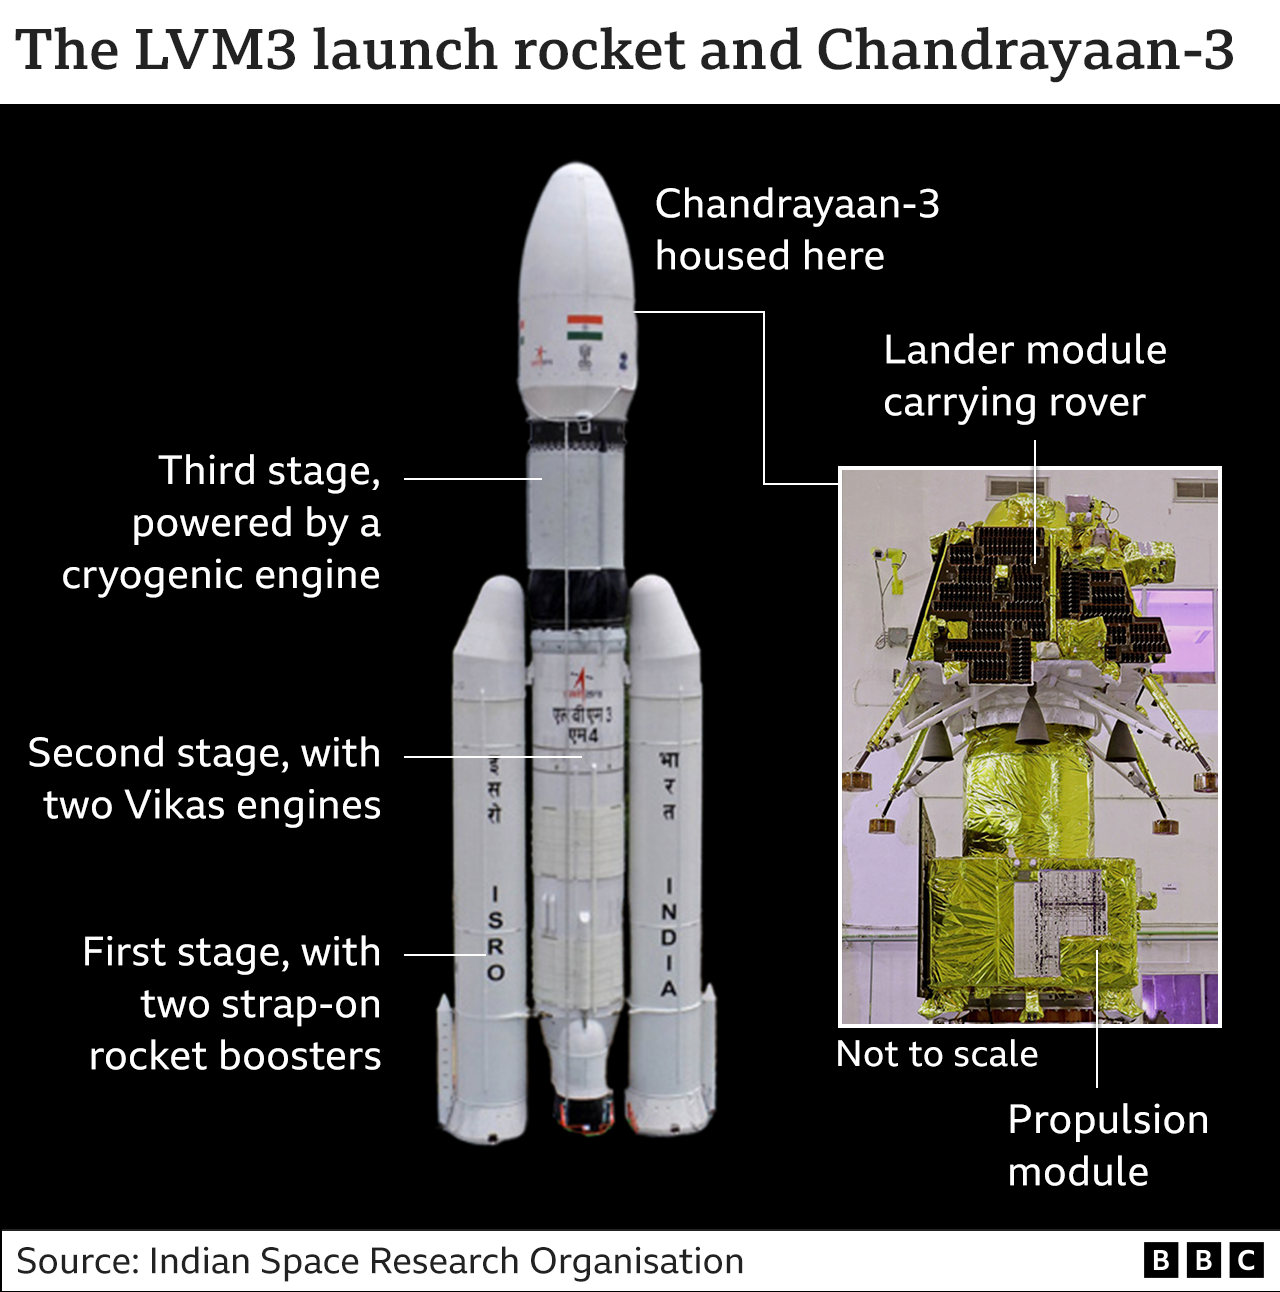 Graphic showing the LVM3 launch rocket, with three engine phases, and where the Chandrayaan-3 will be while it it carried into orbit